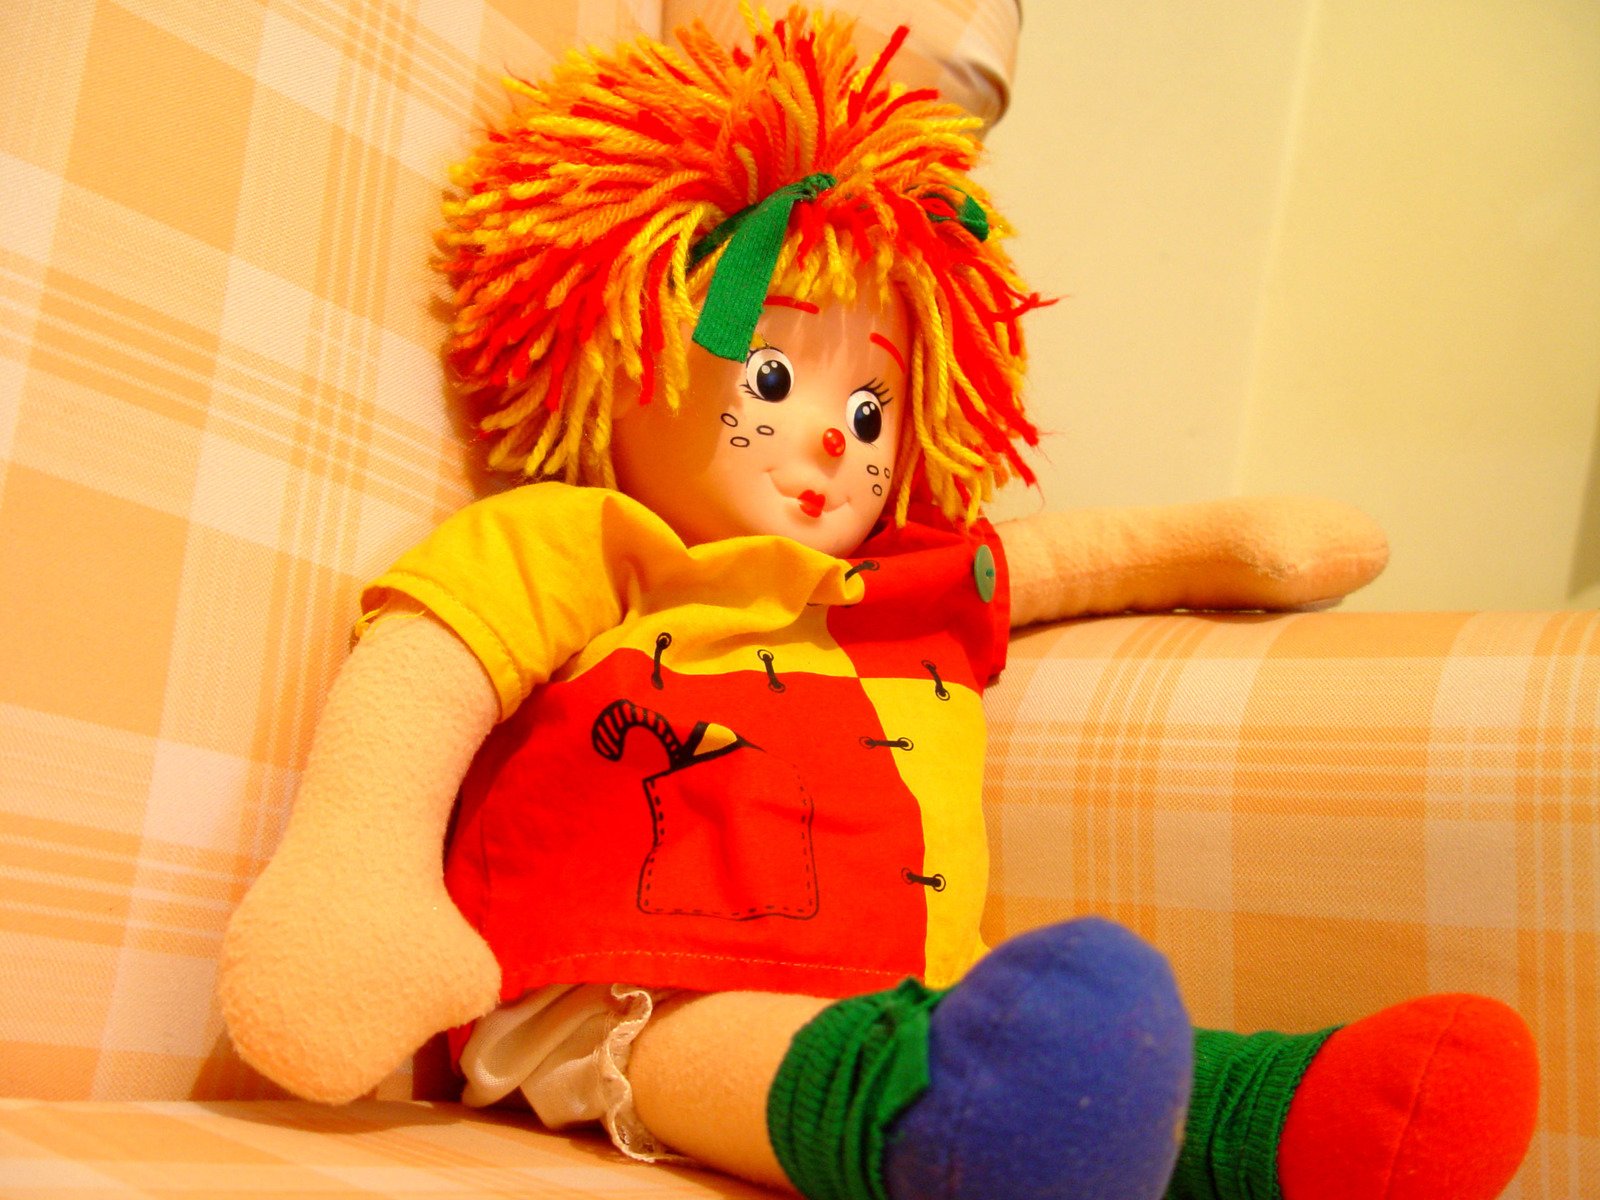 a little boy doll with colorful hair sitting on a chair